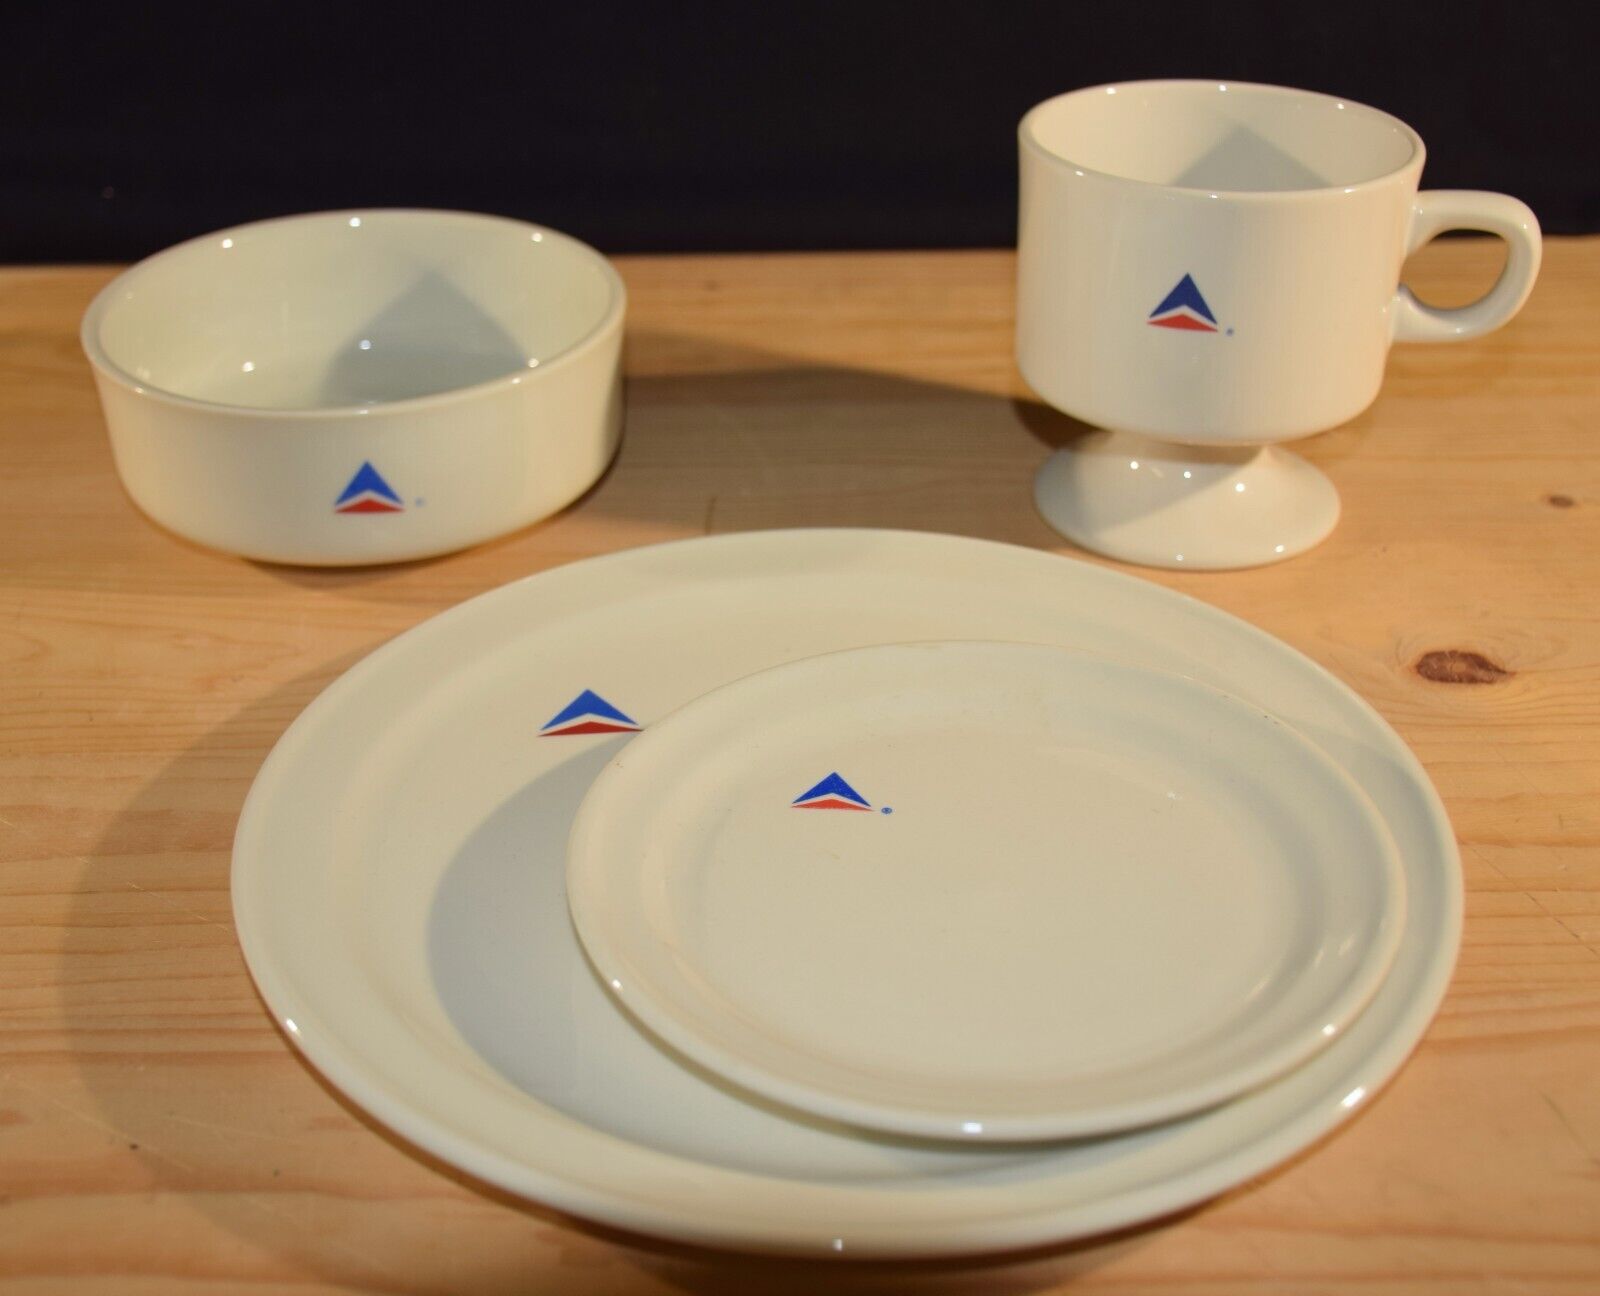 Complete Set of Delta Air Lines' 1960s Meal Service